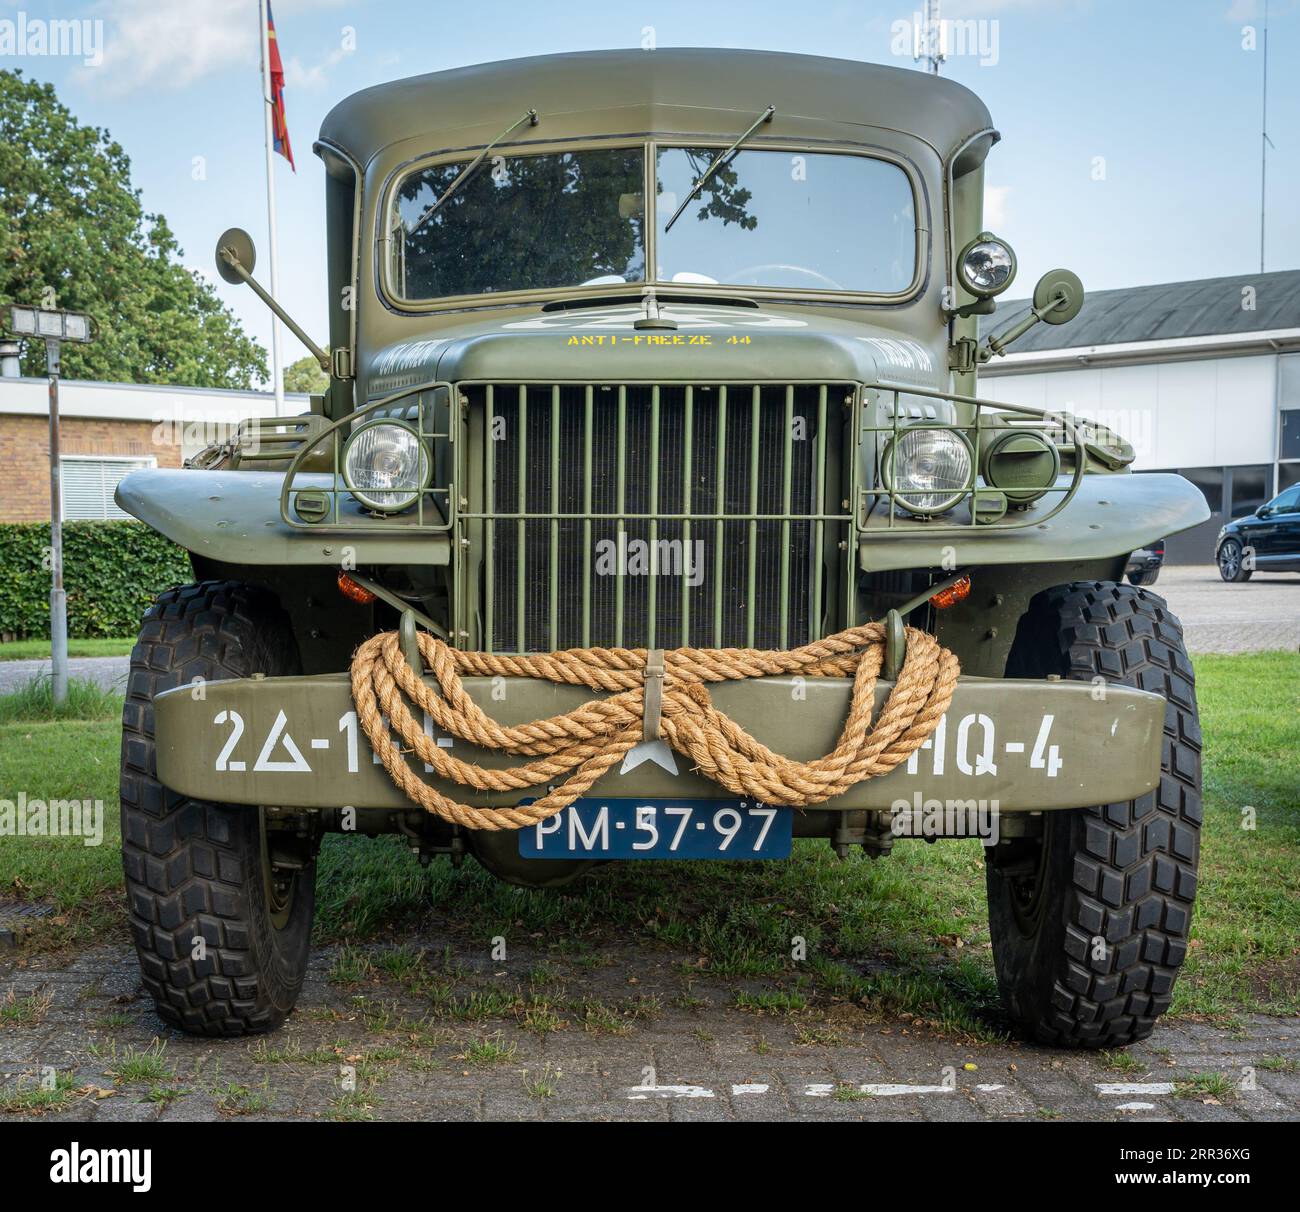 Coevorden, The Netherlands, 02.09.2023, Front view of the vintage Dodge WC54 military ambulance Stock Photo